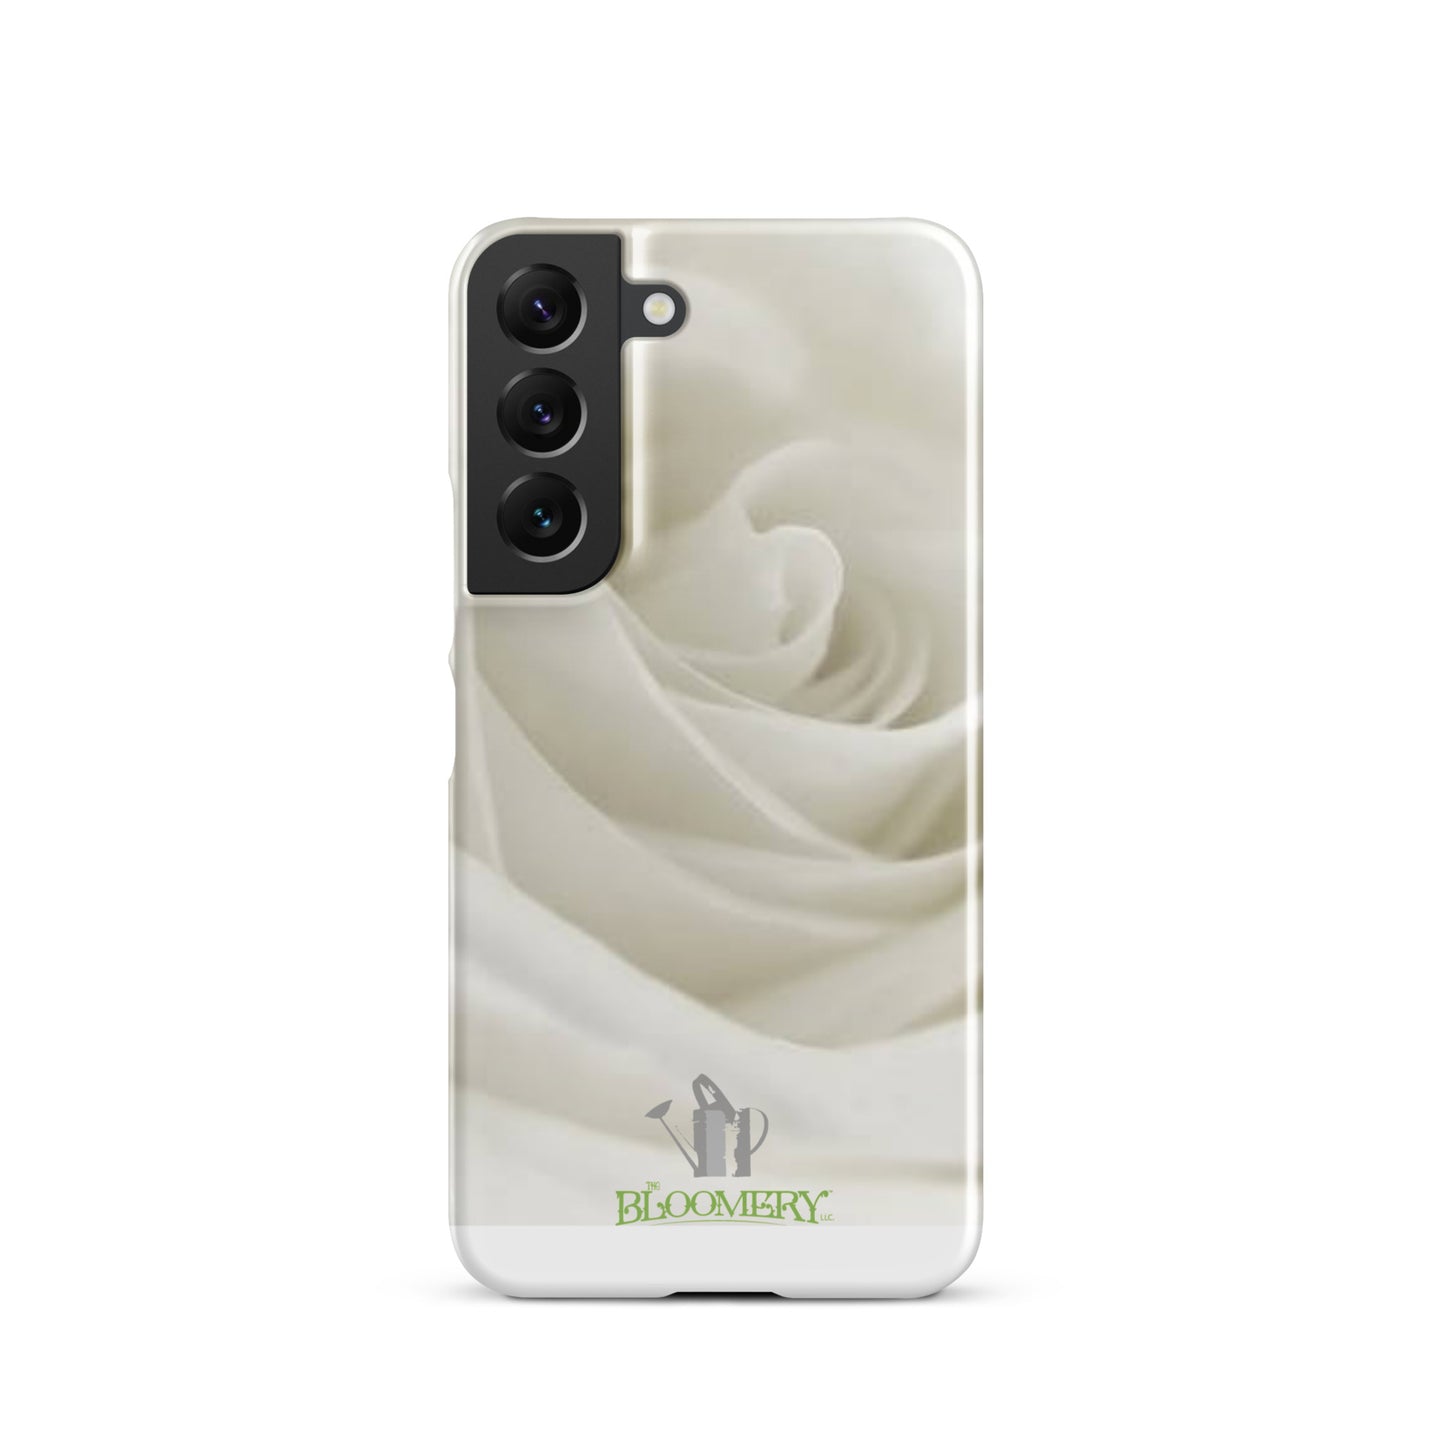 Snap case for Samsung®